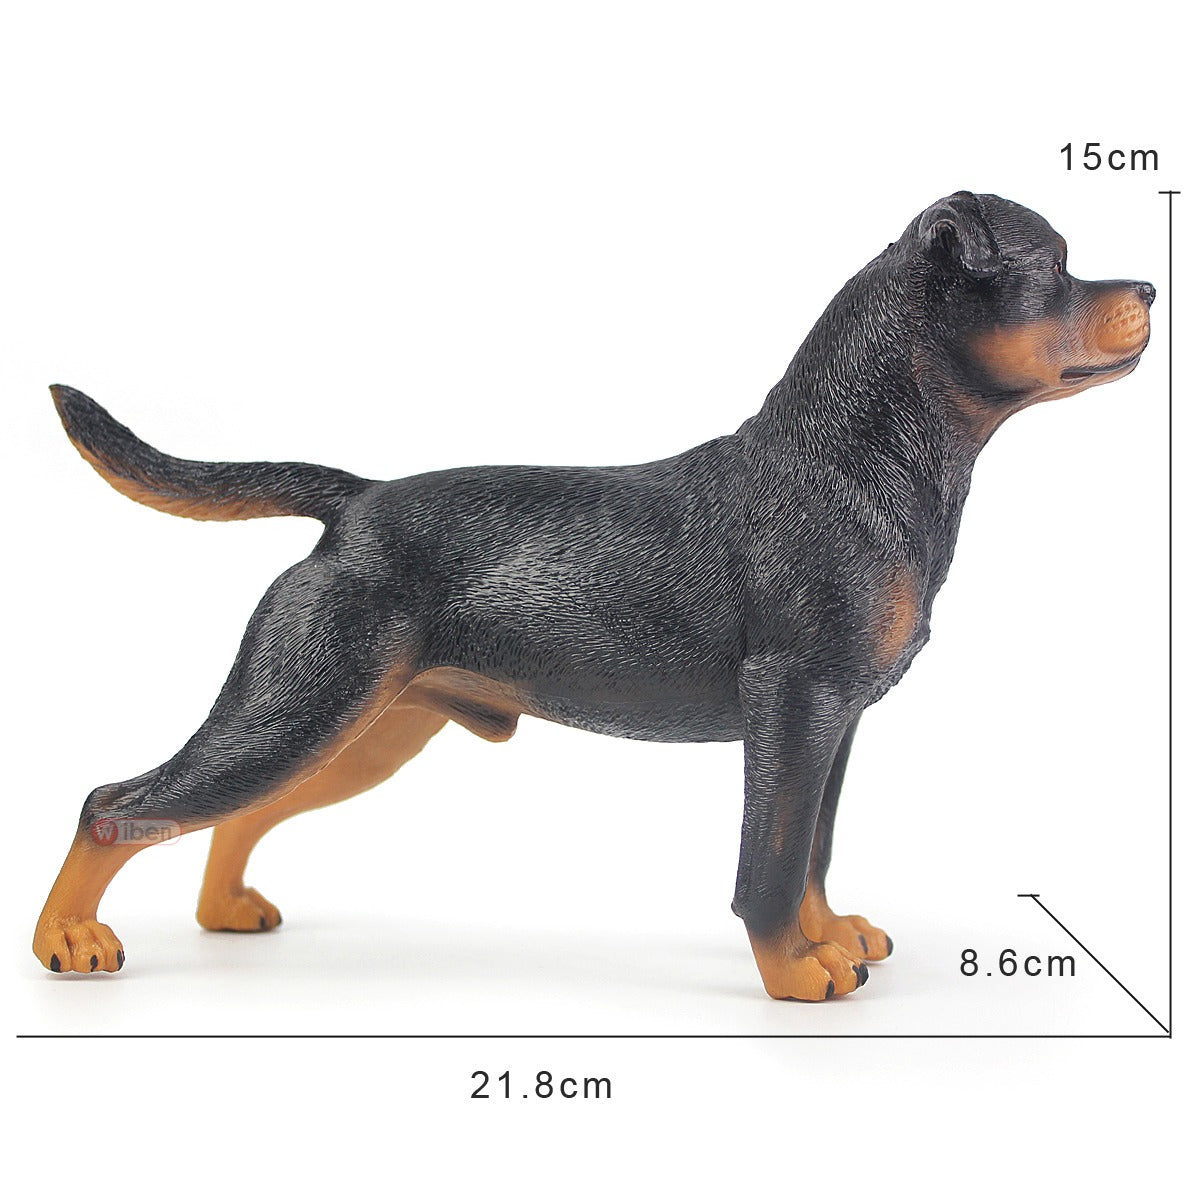 "Toby the Rottweiler" Realistic ornament by SB - Style's Bug